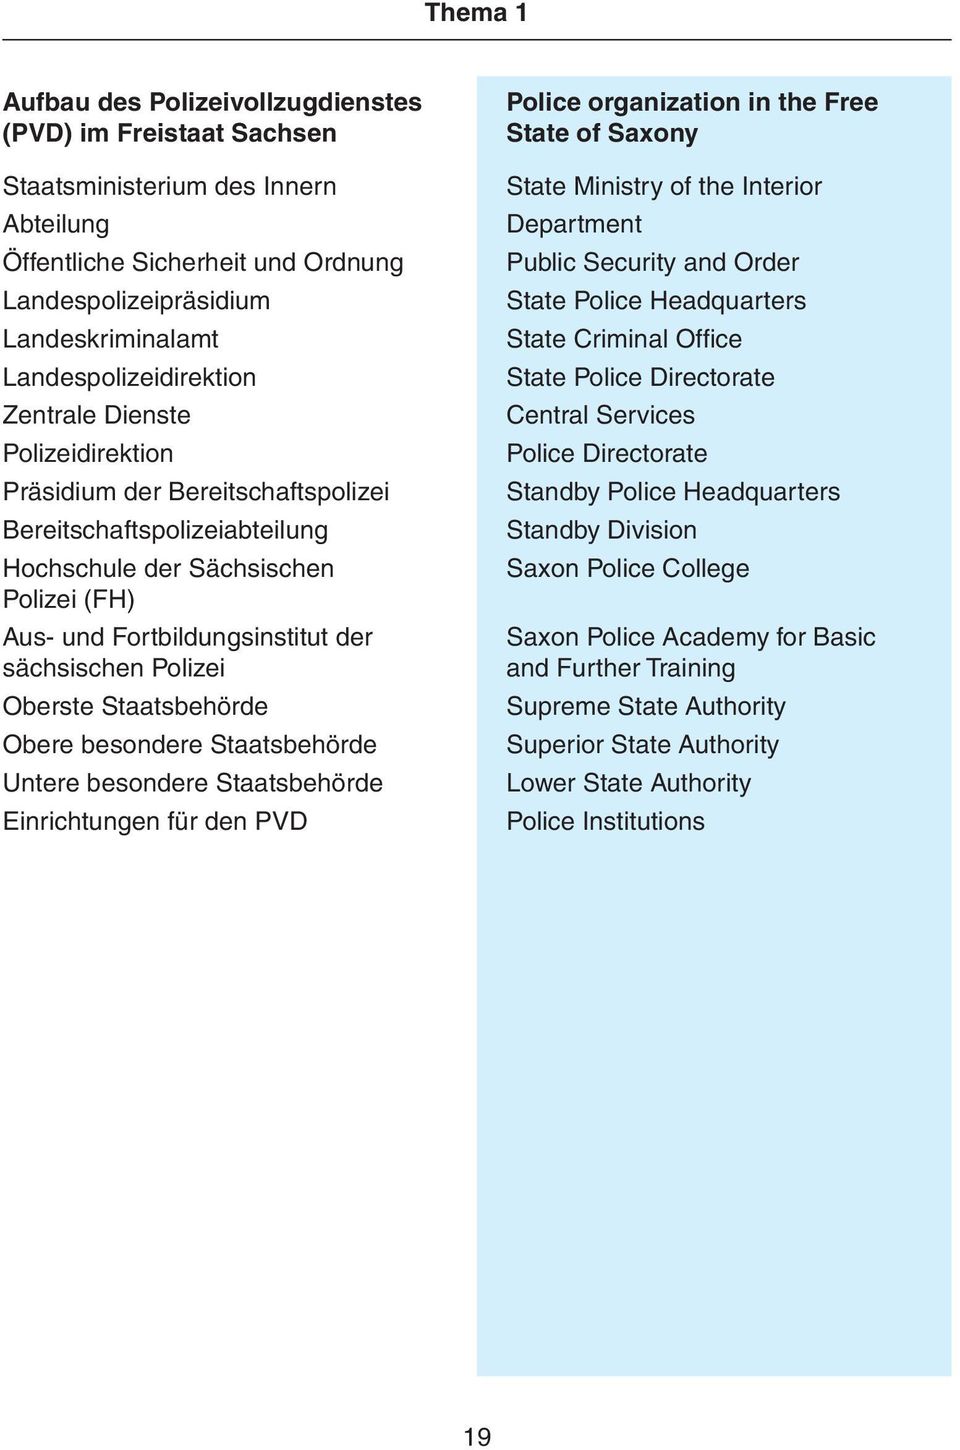 Oberste Staatsbehörde Obere besondere Staatsbehörde Untere besondere Staatsbehörde Einrichtungen für den PVD Police organization in the Free State of Saxony State Ministry of the Interior Department